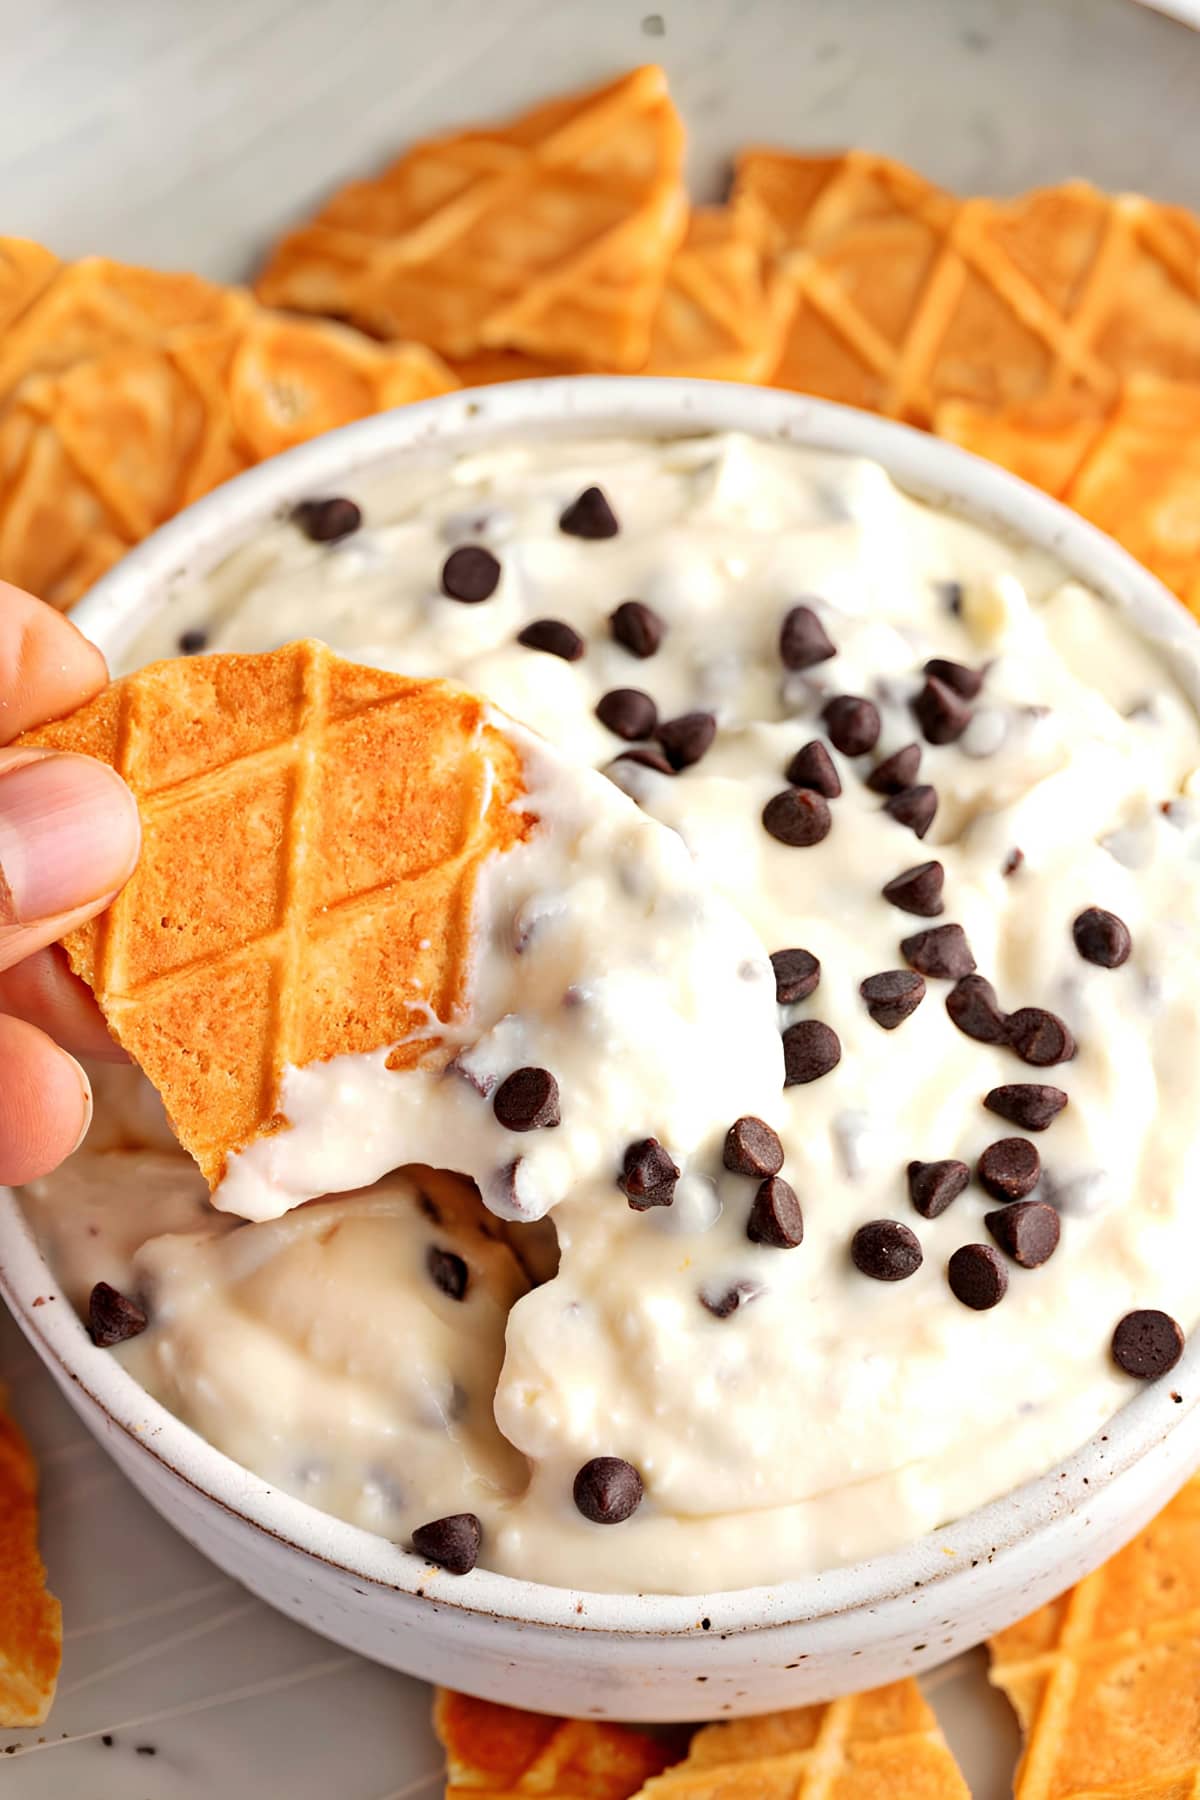 Rich and Creamy Cannoli Dip with Chocolate Chips